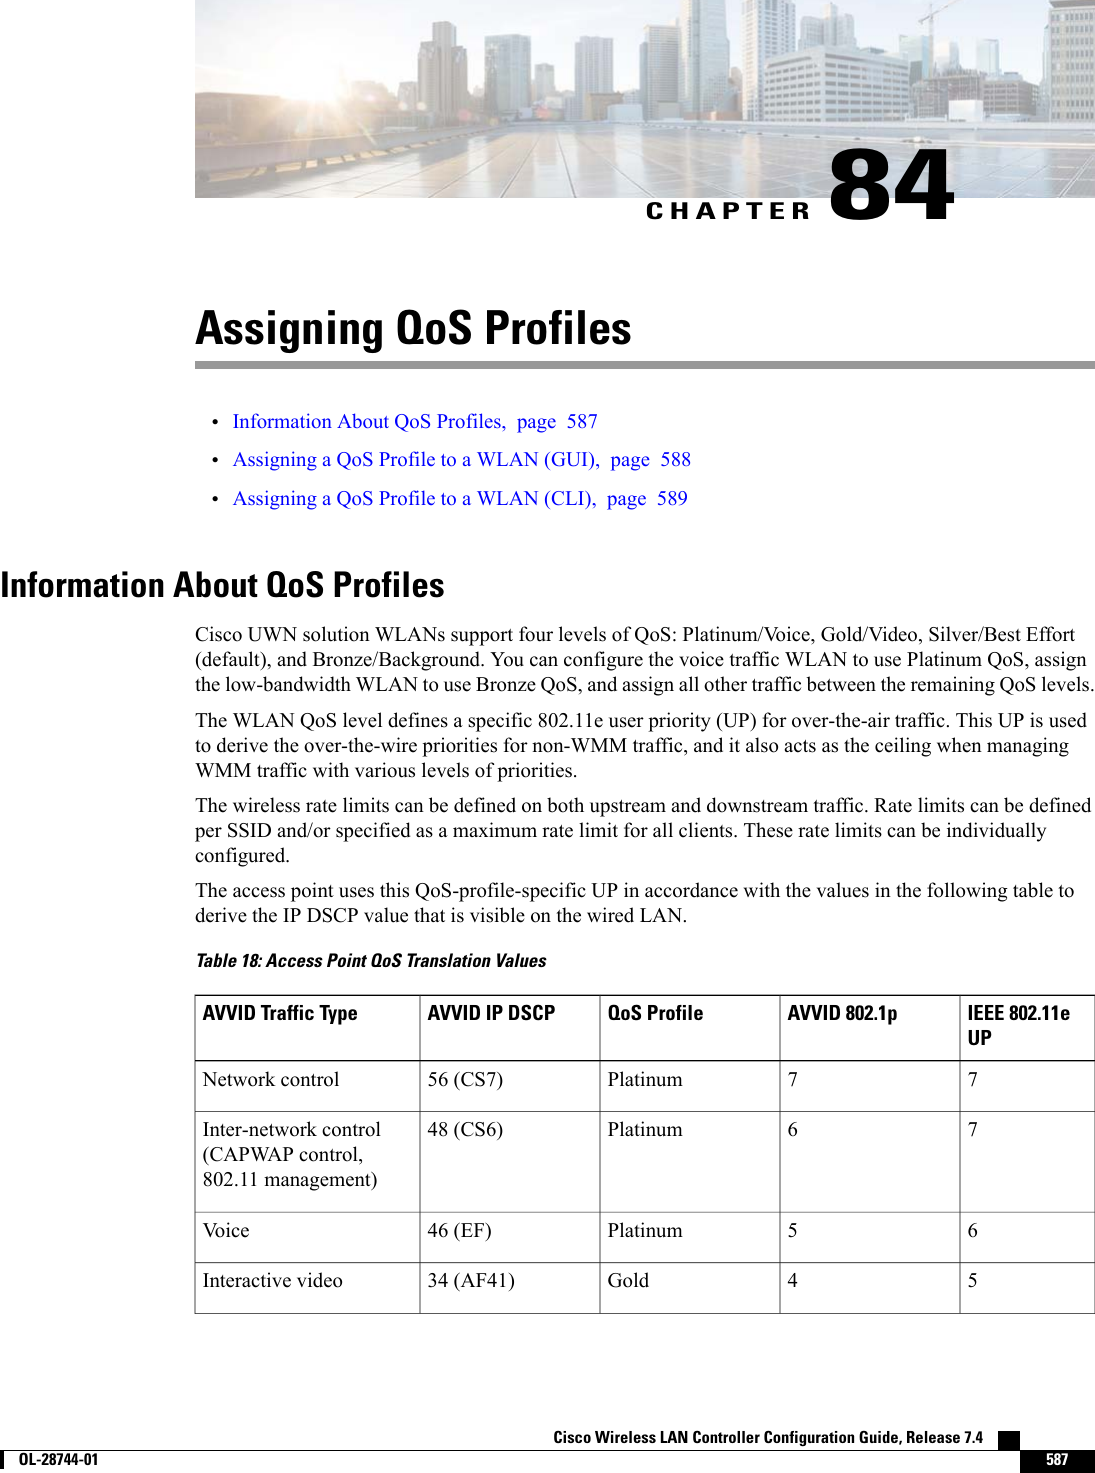 CHAPTER 84Assigning QoS Profiles•Information About QoS Profiles, page 587•Assigning a QoS Profile to a WLAN (GUI), page 588•Assigning a QoS Profile to a WLAN (CLI), page 589Information About QoS ProfilesCisco UWN solution WLANs support four levels of QoS: Platinum/Voice, Gold/Video, Silver/Best Effort(default), and Bronze/Background. You can configure the voice traffic WLAN to use Platinum QoS, assignthe low-bandwidth WLAN to use Bronze QoS, and assign all other traffic between the remaining QoS levels.The WLAN QoS level defines a specific 802.11e user priority (UP) for over-the-air traffic. This UP is usedto derive the over-the-wire priorities for non-WMM traffic, and it also acts as the ceiling when managingWMM traffic with various levels of priorities.The wireless rate limits can be defined on both upstream and downstream traffic. Rate limits can be definedper SSID and/or specified as a maximum rate limit for all clients. These rate limits can be individuallyconfigured.The access point uses this QoS-profile-specific UP in accordance with the values in the following table toderive the IP DSCP value that is visible on the wired LAN.Table 18: Access Point QoS Translation ValuesIEEE 802.11eUPAVVID 802.1pQoS ProfileAVVID IP DSCPAVVID Traffic Type77Platinum56 (CS7)Network control76Platinum48 (CS6)Inter-network control(CAPWAP control,802.11 management)65Platinum46 (EF)Voice54Gold34 (AF41)Interactive videoCisco Wireless LAN Controller Configuration Guide, Release 7.4        OL-28744-01 587